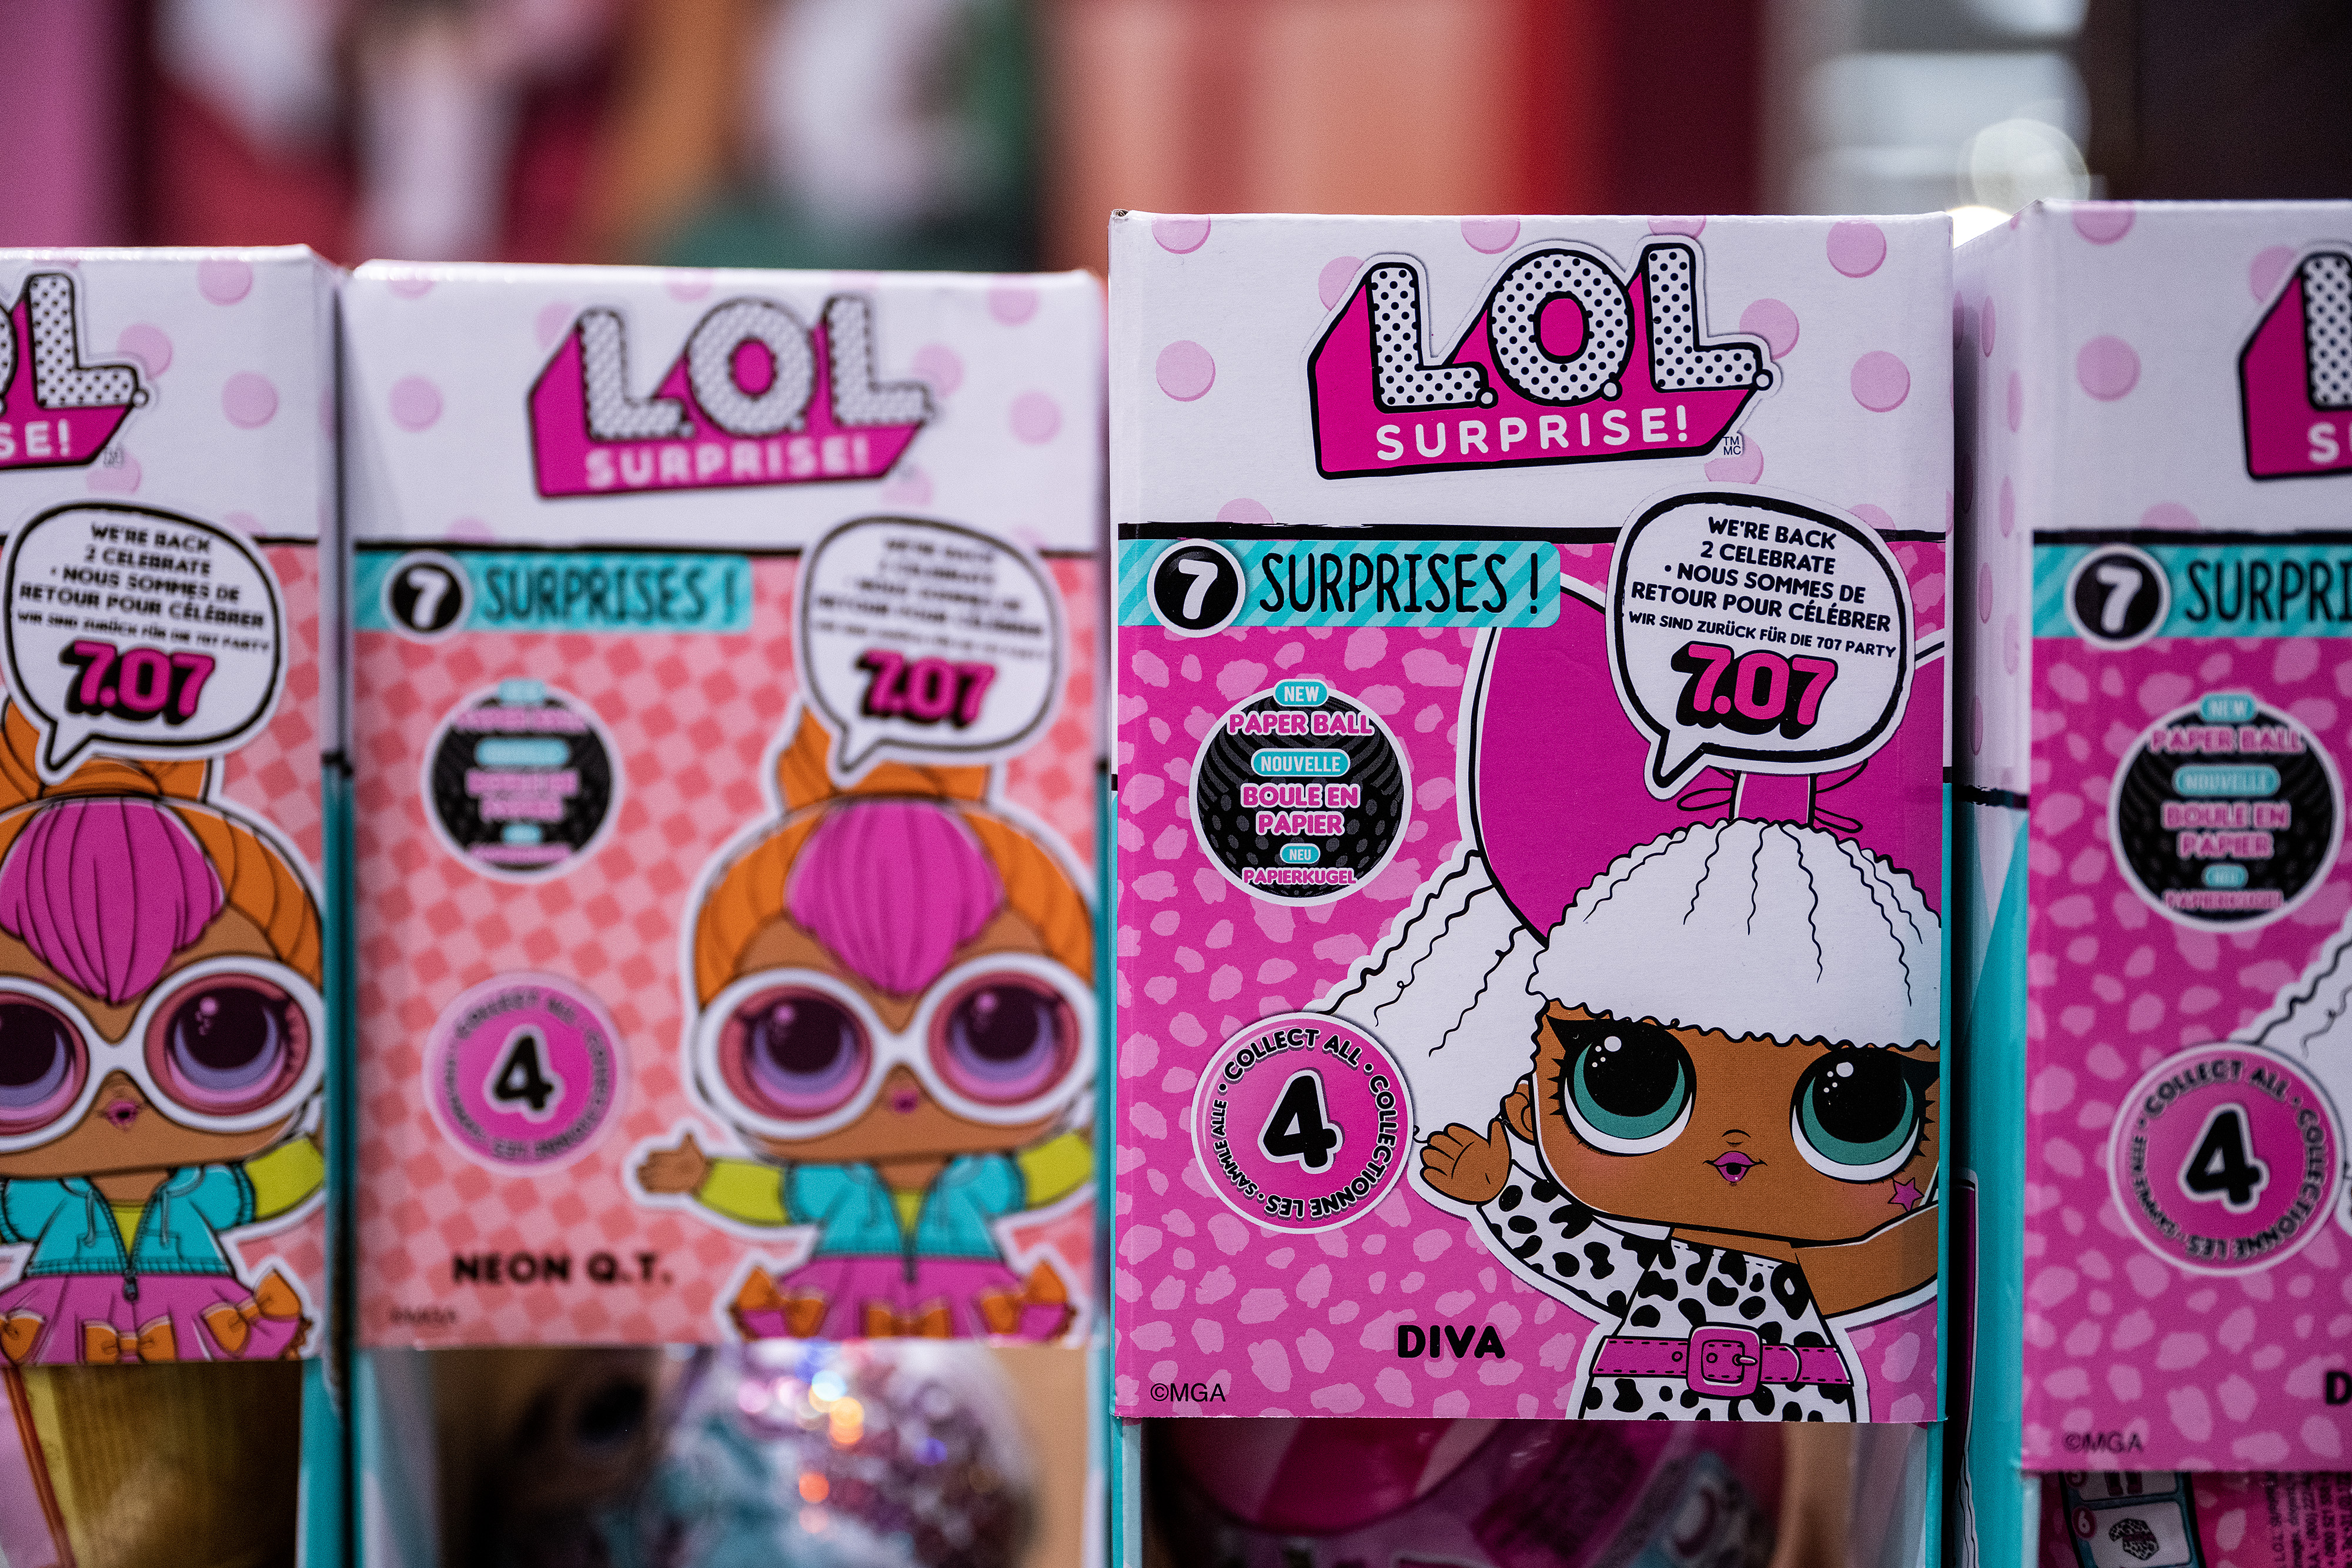 Rapper T.I. and Wife Sue Toymaker Over Popular OMG LOL Surprise Dolls